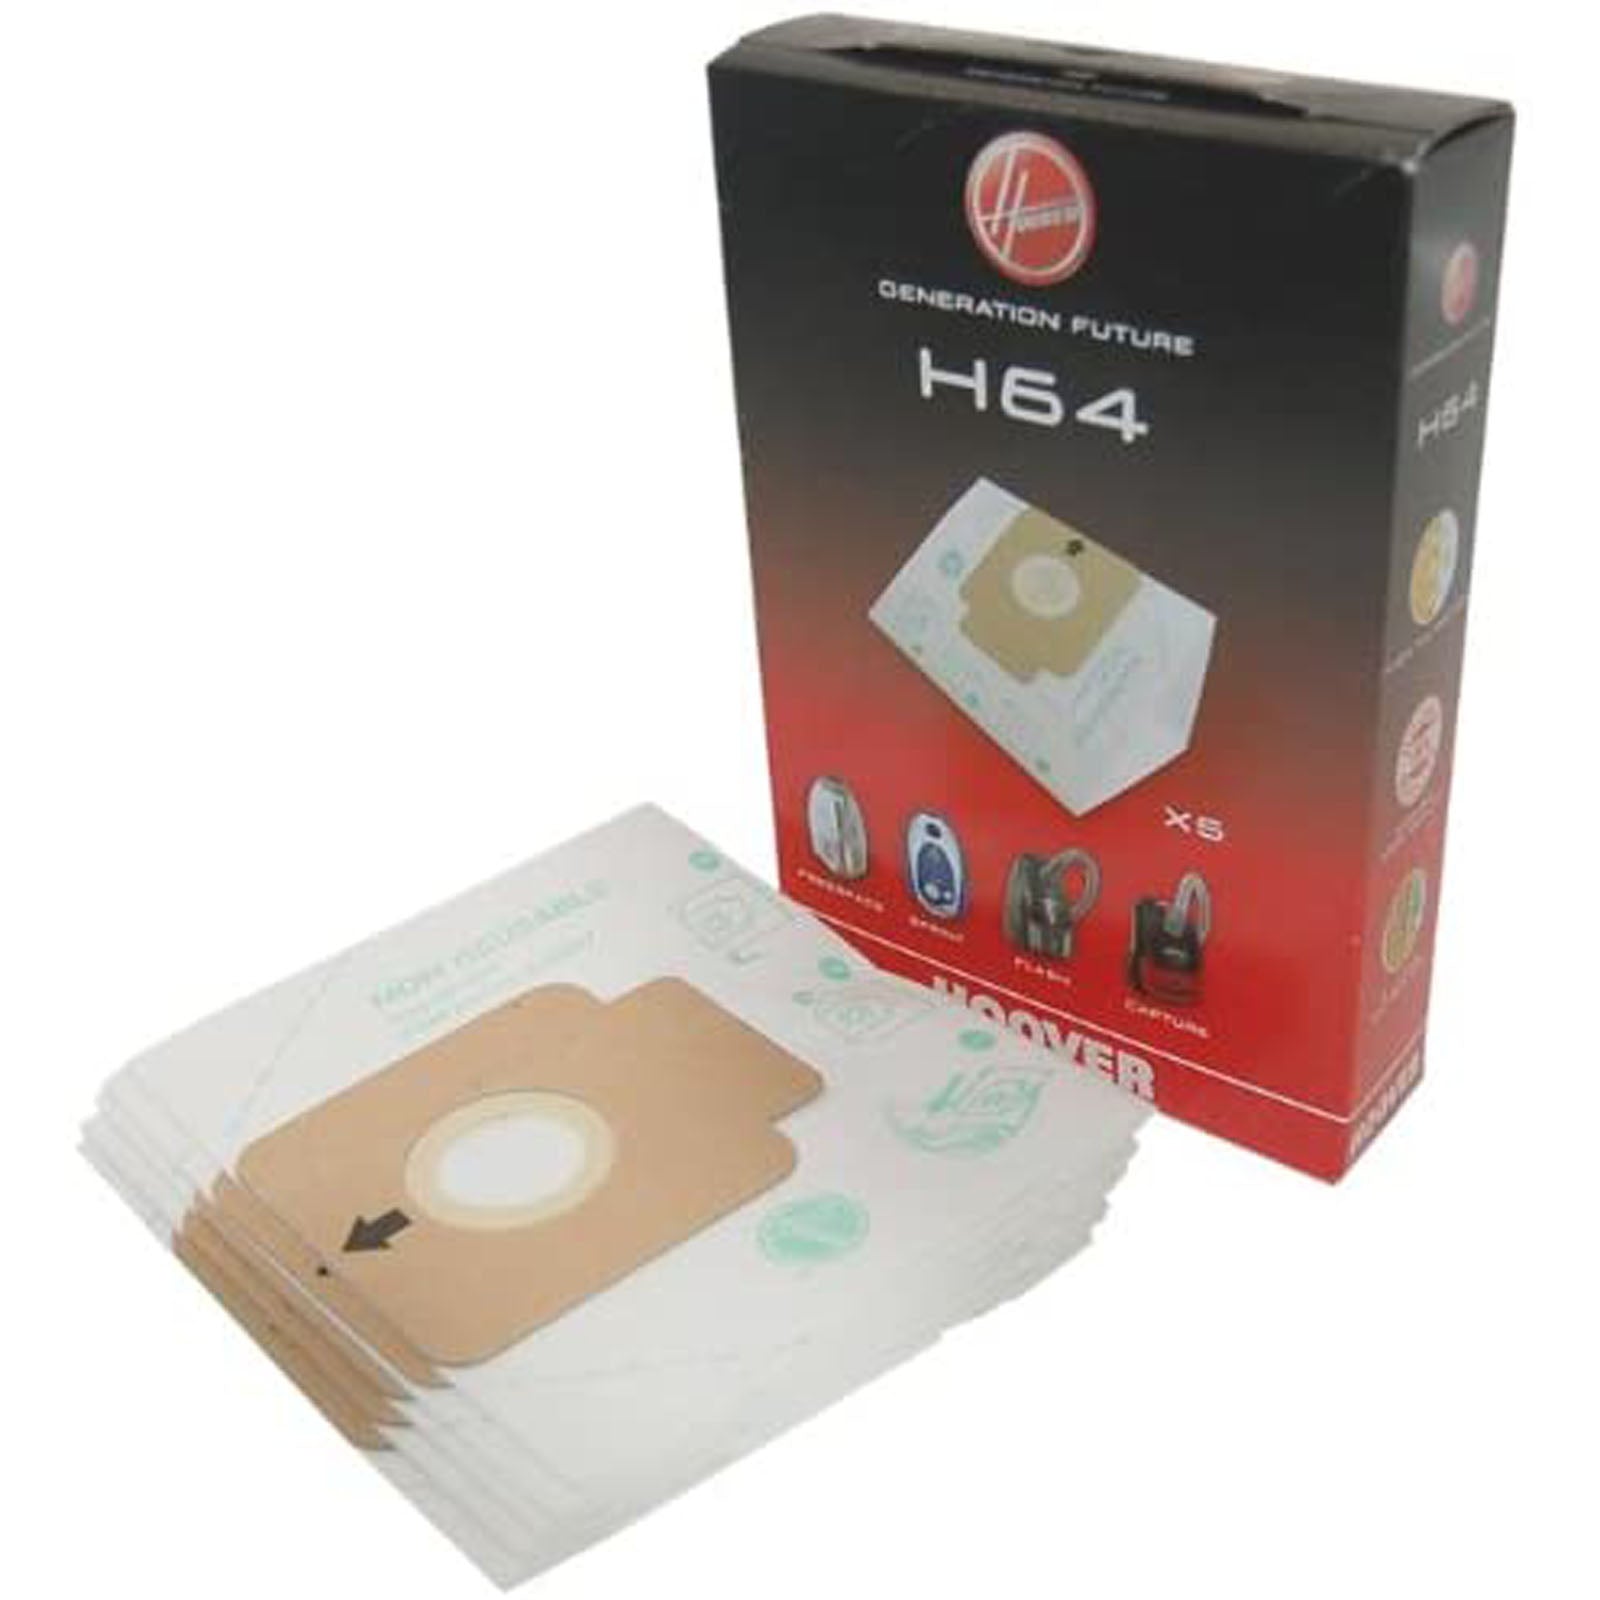 HOOVER Vacuum Cleaner H64 Dust Bag Genuine Freespace Sprint Flash Capture Cylinder 09200245 (Pack of 4) + 20 Fresheners